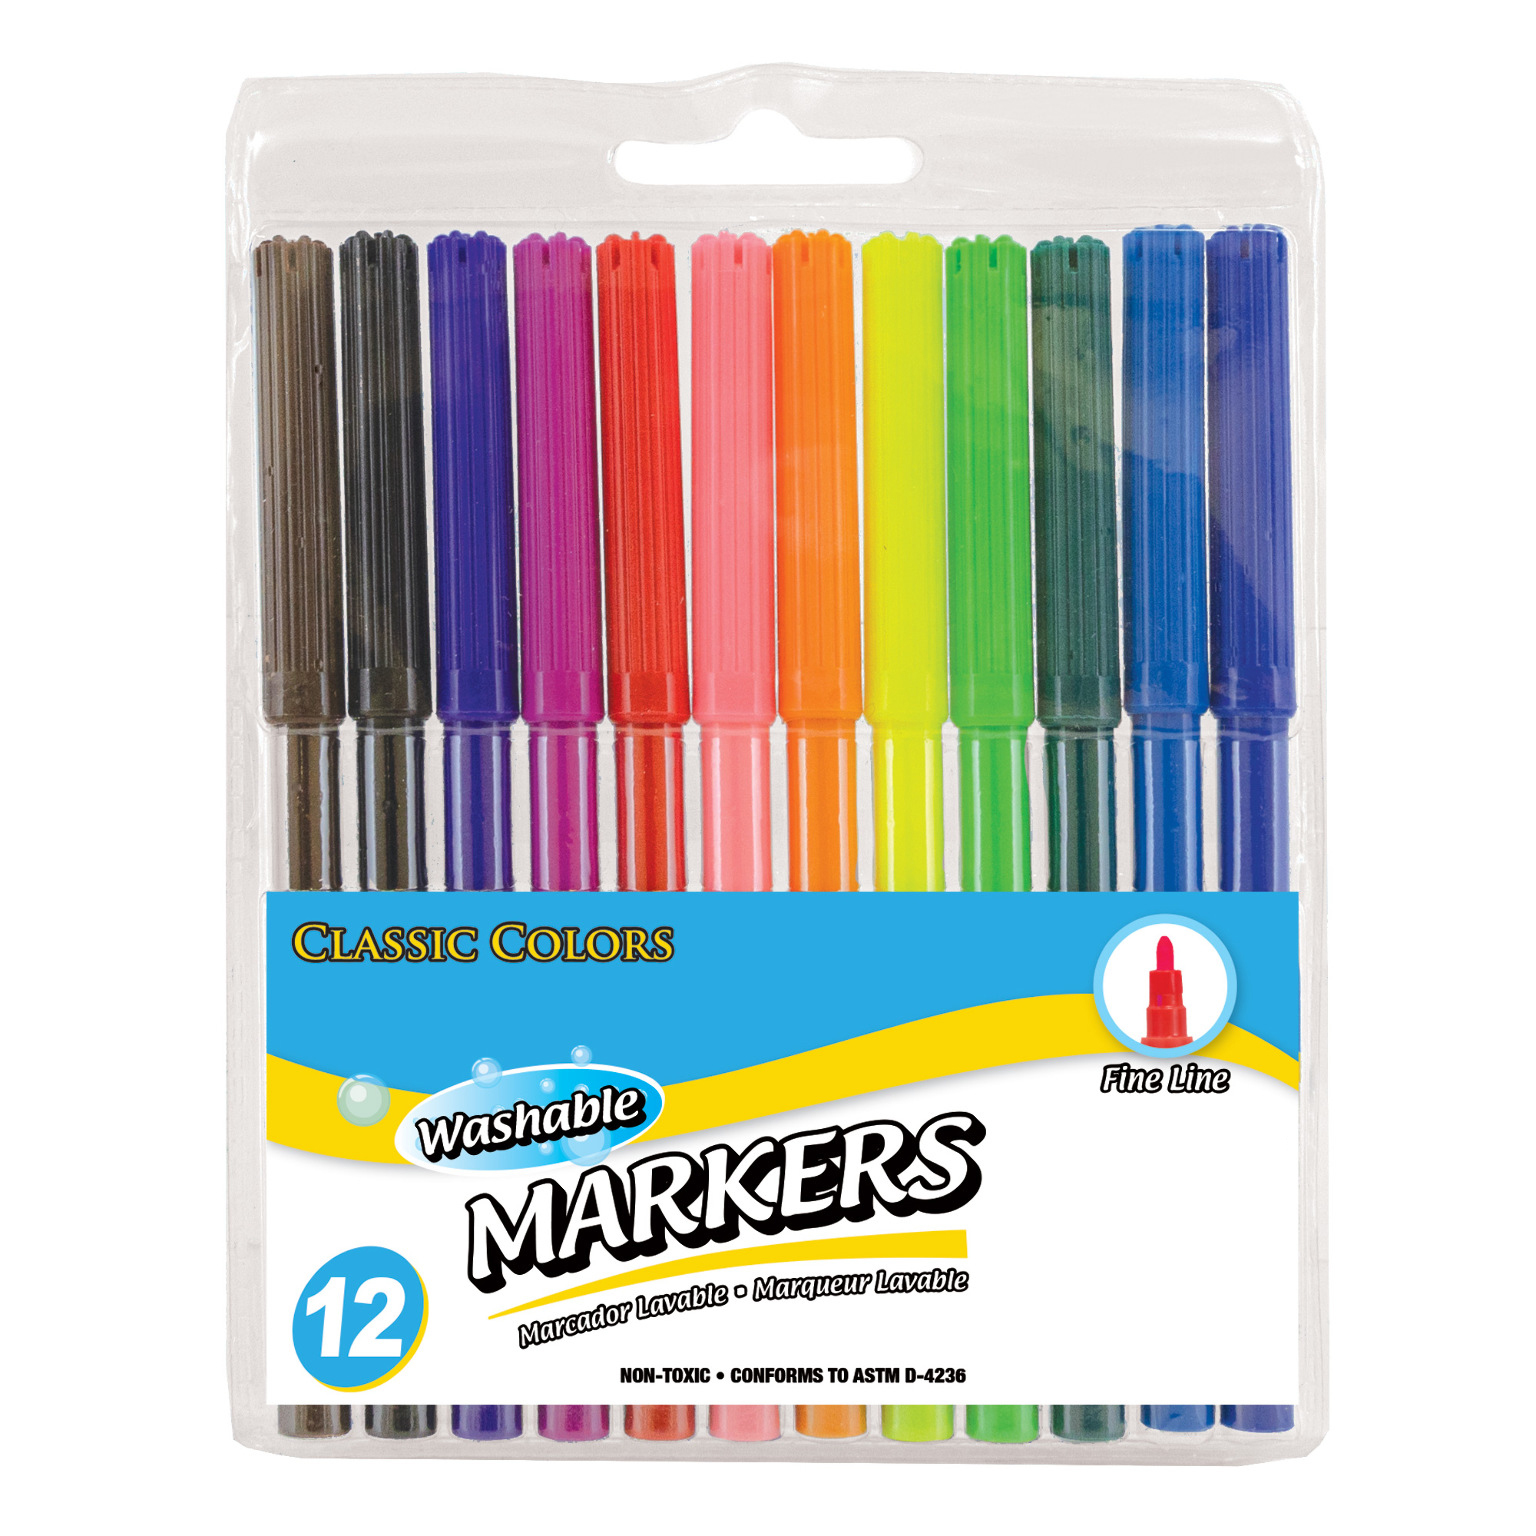 Play Day 8 Glitter Markers, 20 Washable Markers & 200 sheets of